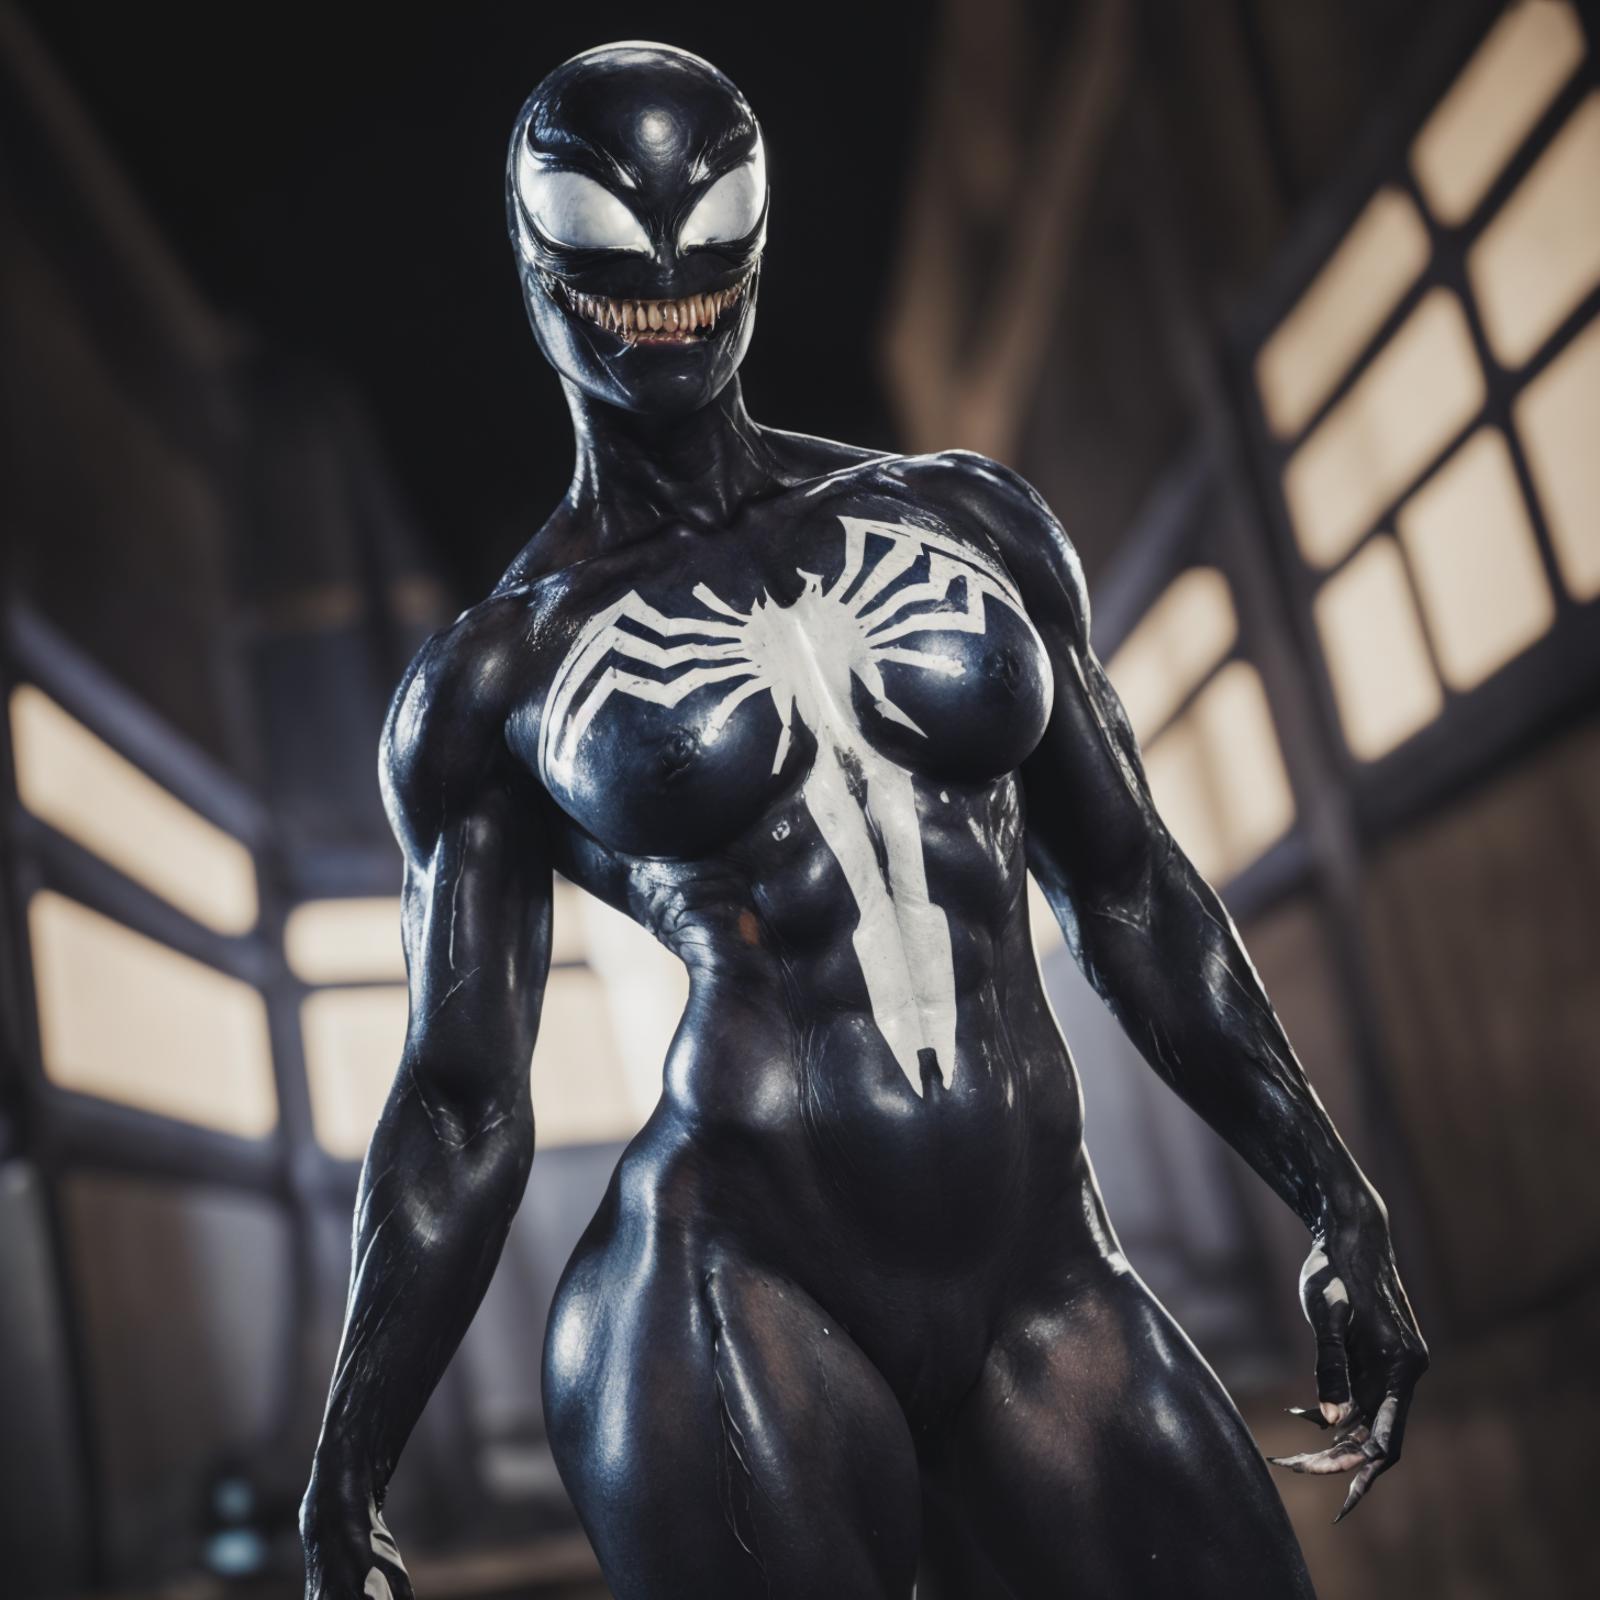 Symbiote / She-Venom LoRA image by Electroverted